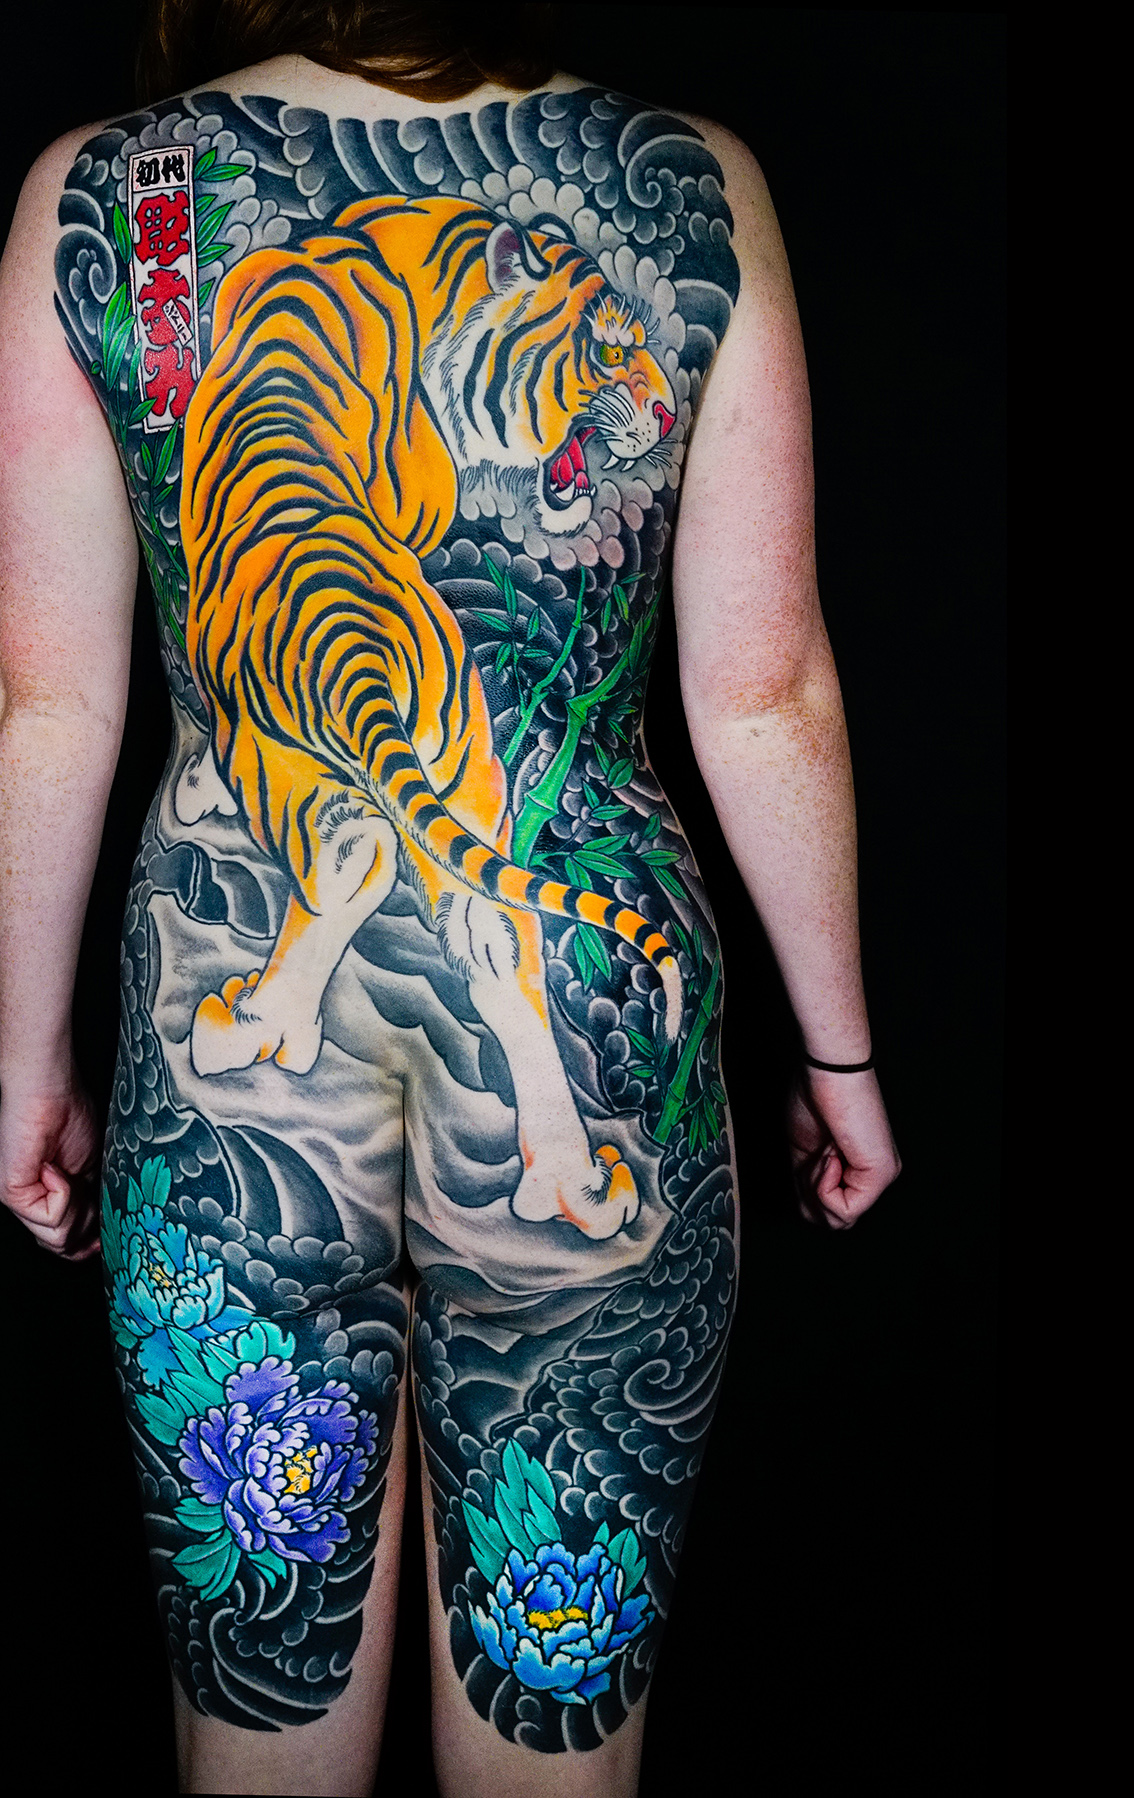 Authentink: Specialist Custom Styles & Japanese Tattooing Studio in Sydney